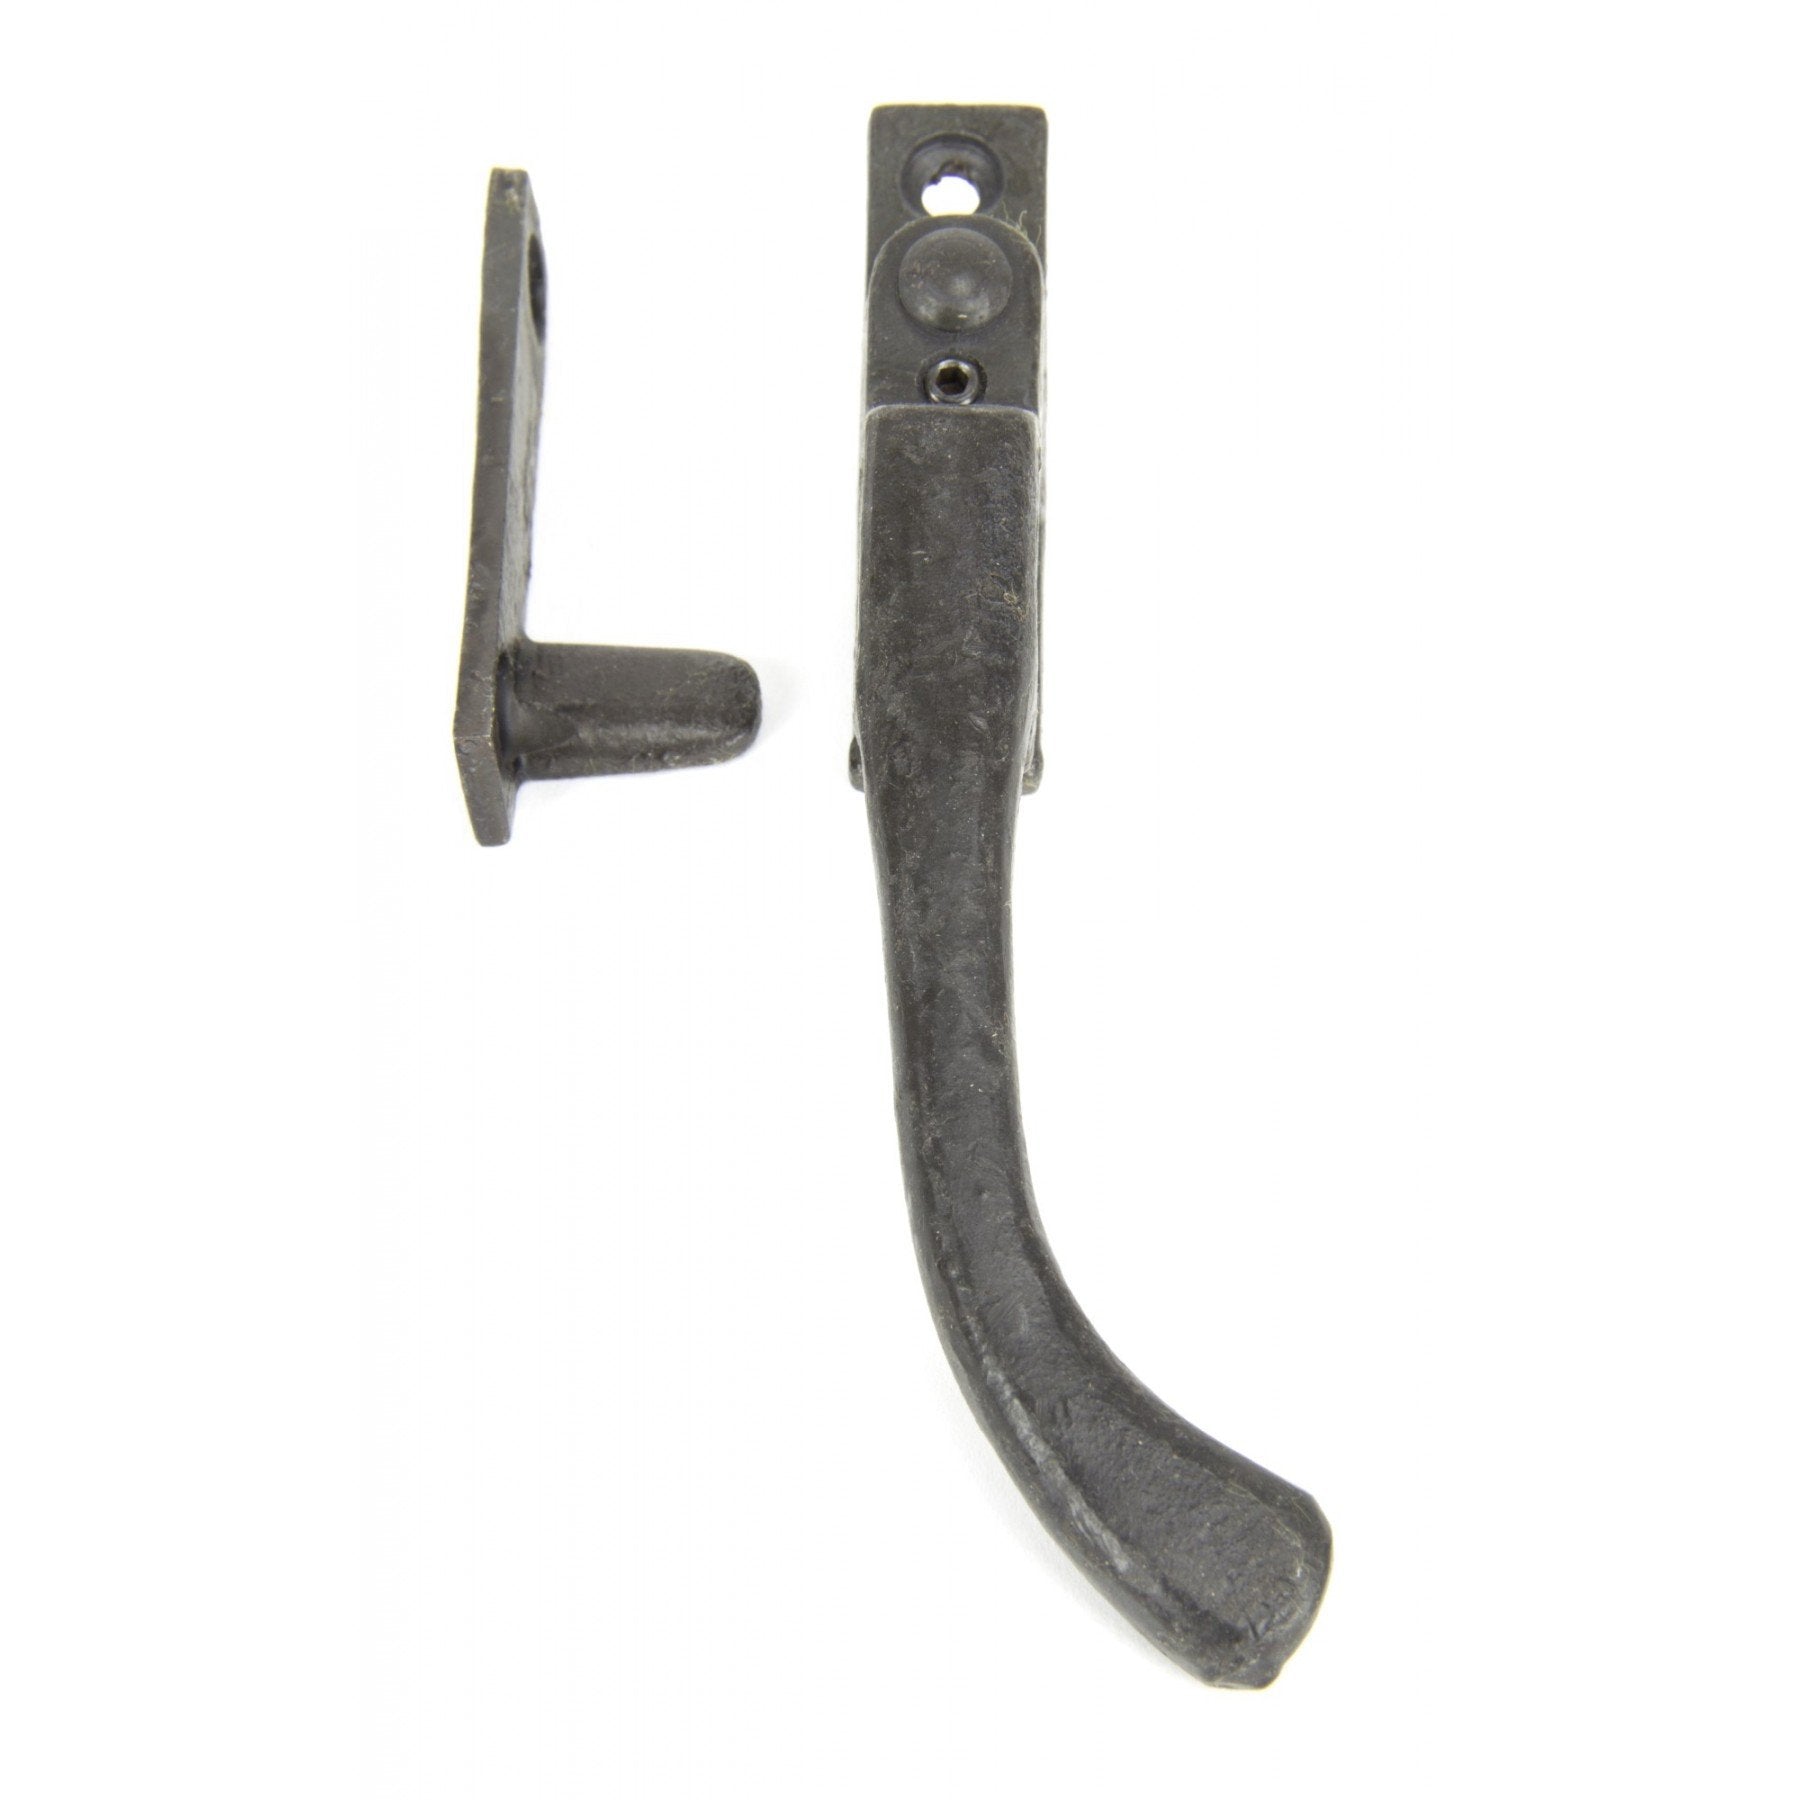 From the Anvil Beeswax Night Vent Fastener RH - Locking